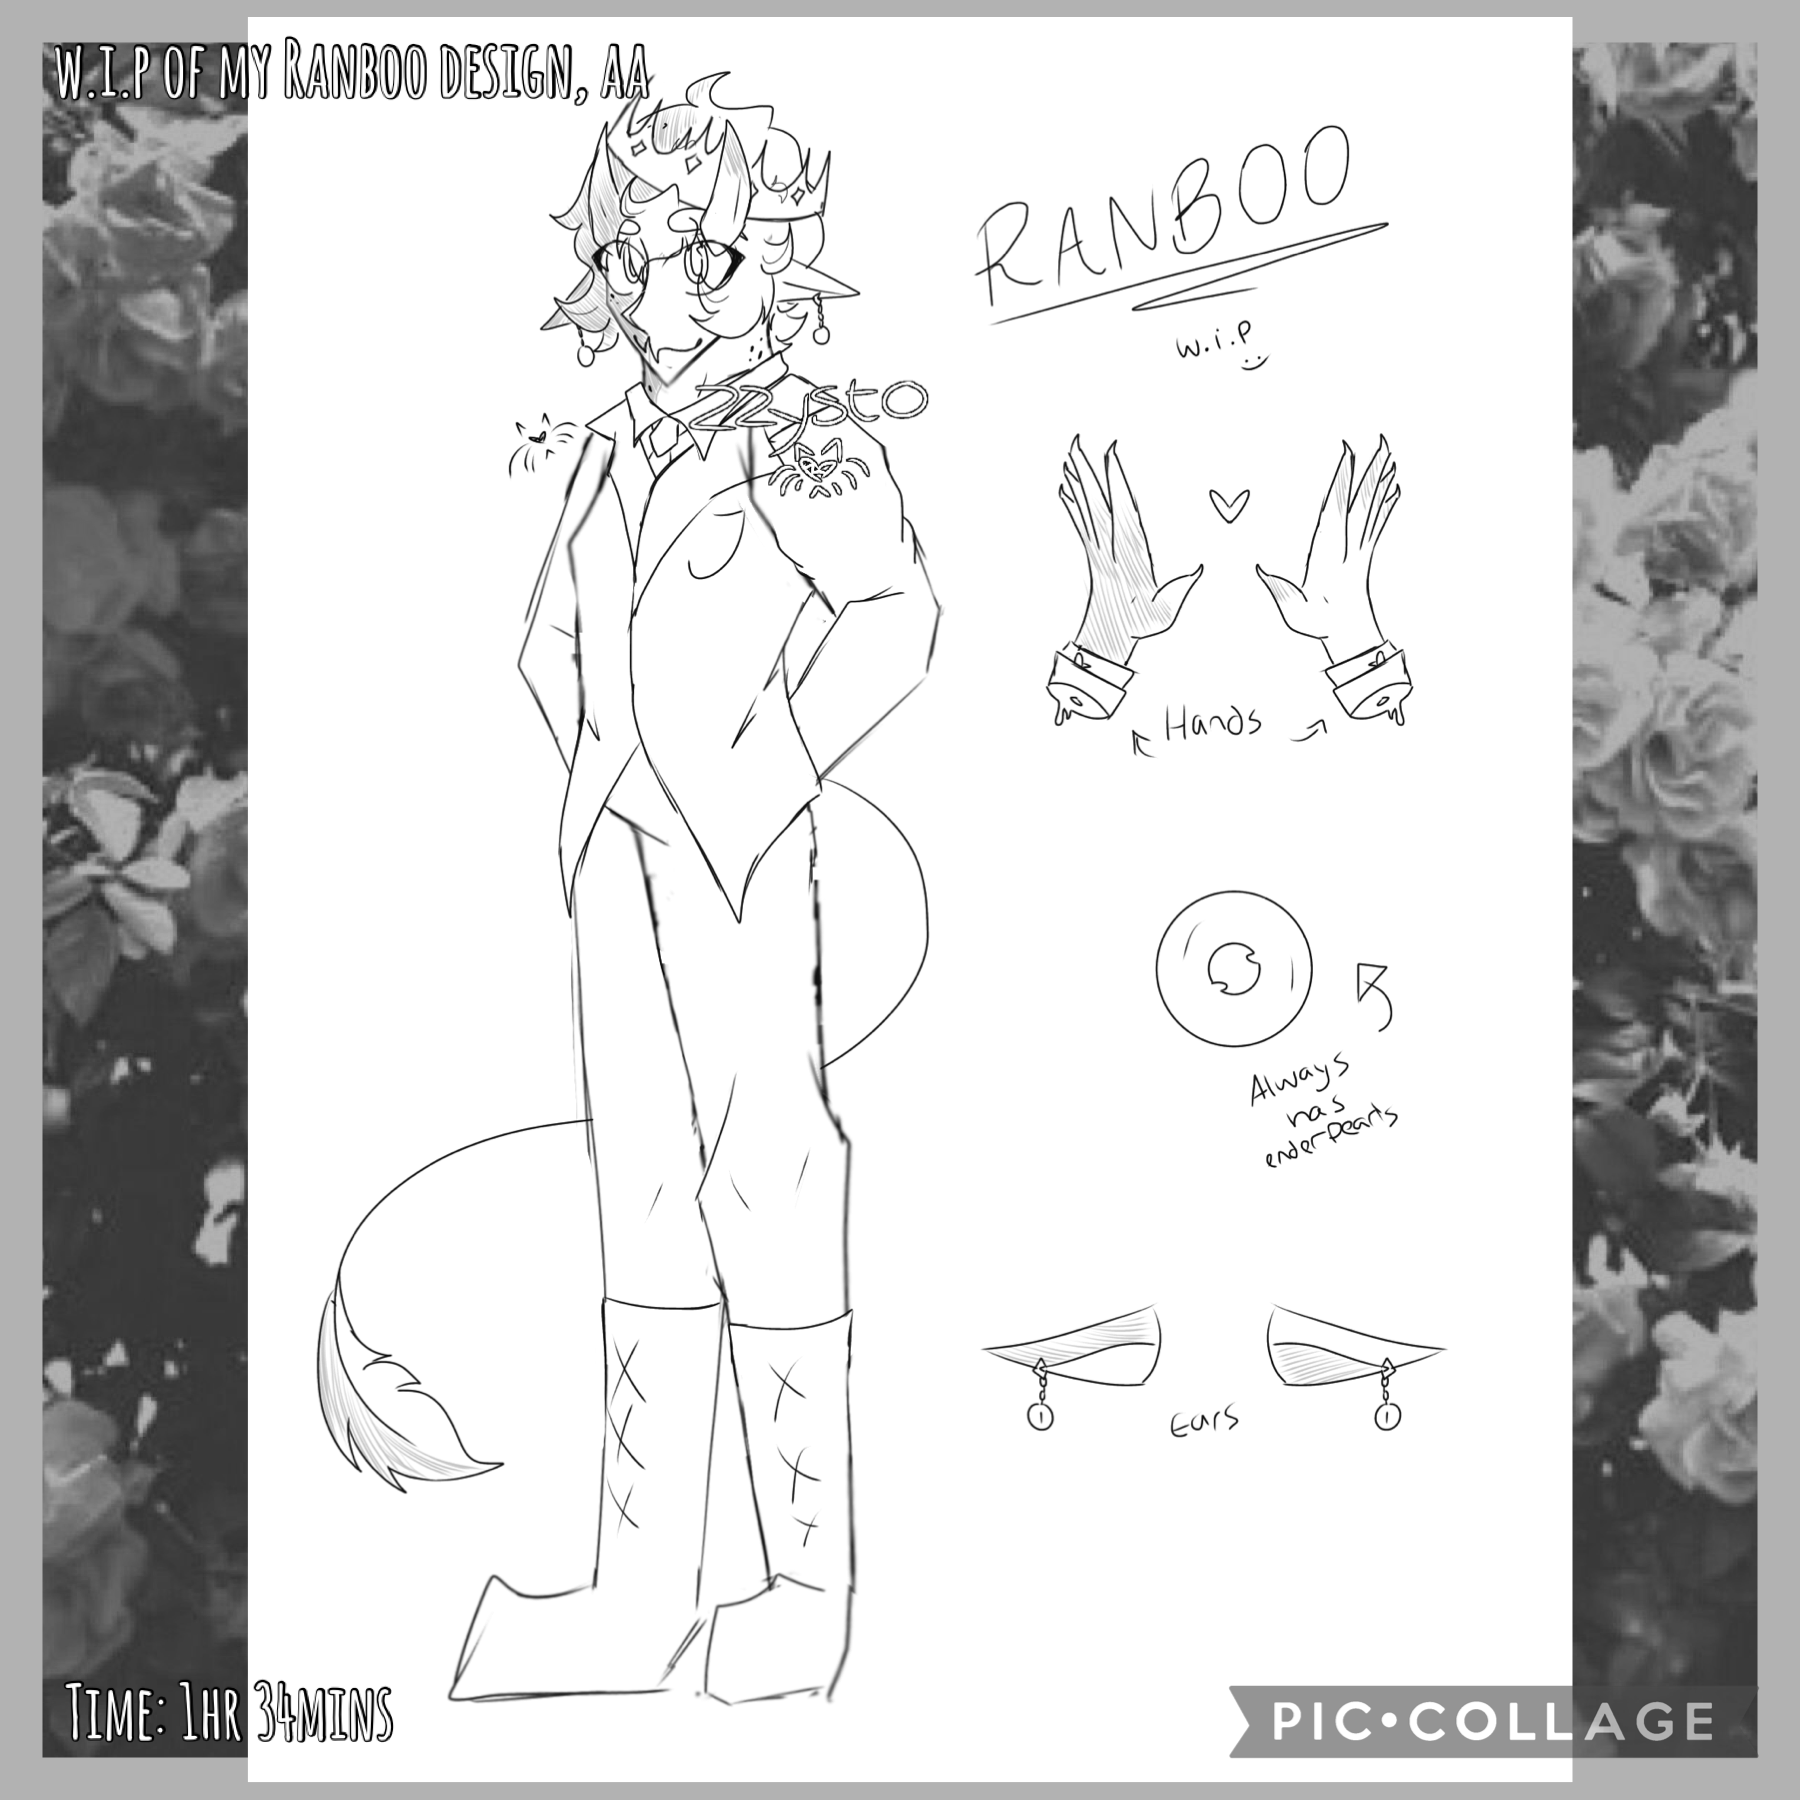 ✨Tap✨
w.i.p of my Ranboo design! He’s very complex, which is why I’m making him a ref :’)
anyway I drew this and have almost finished linearting in a day plus online school with lots of writing so gAK my hand hurtS- rip hand 